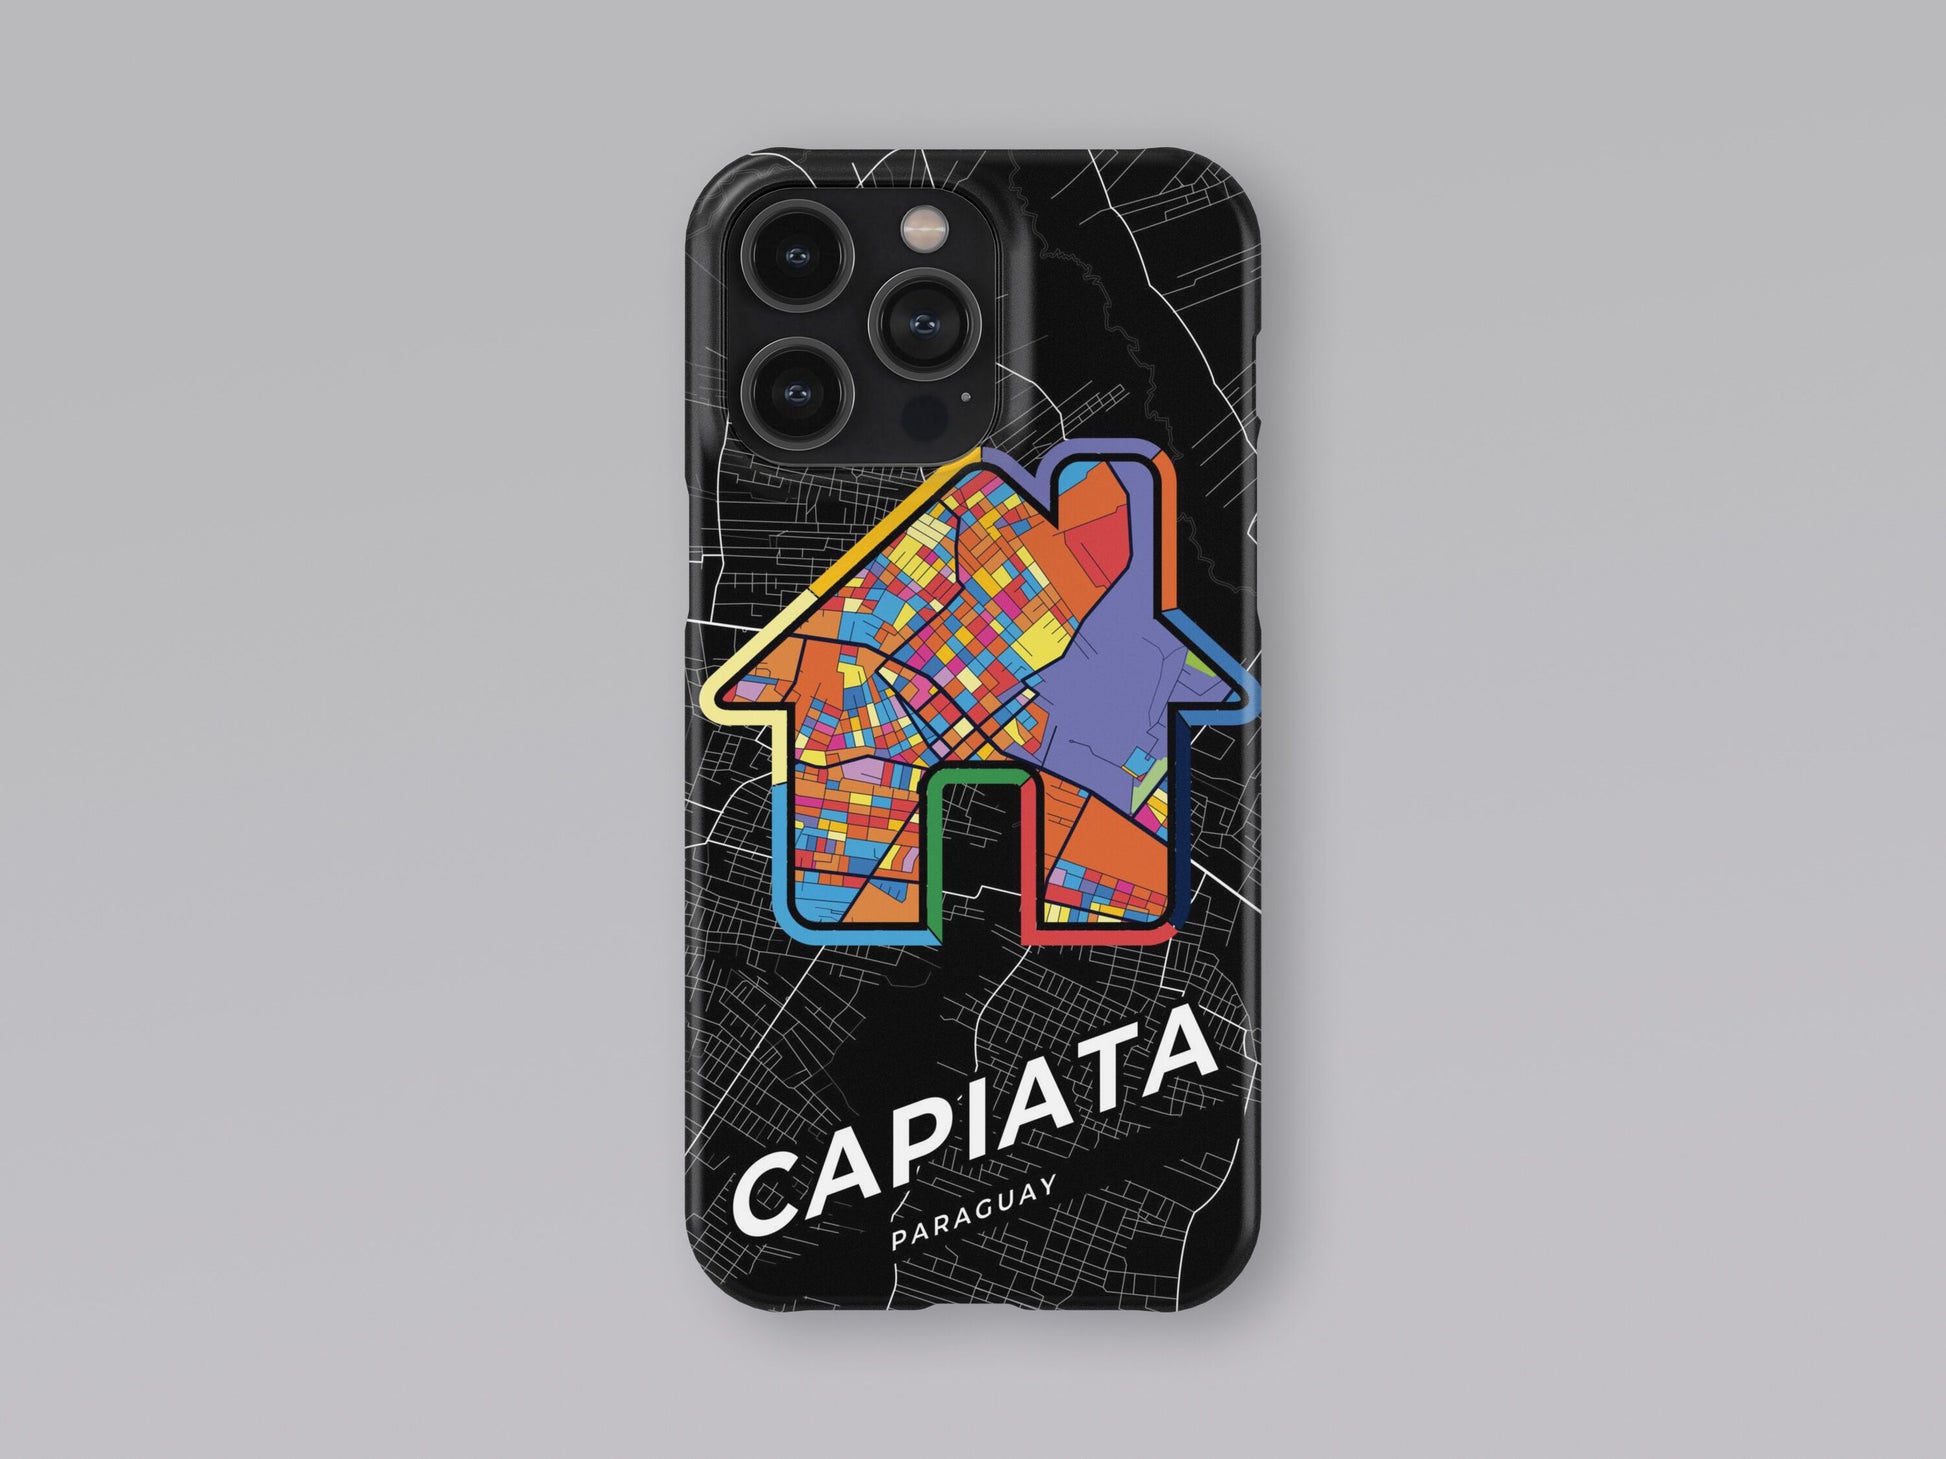 Capiata Paraguay slim phone case with colorful icon. Birthday, wedding or housewarming gift. Couple match cases. 3